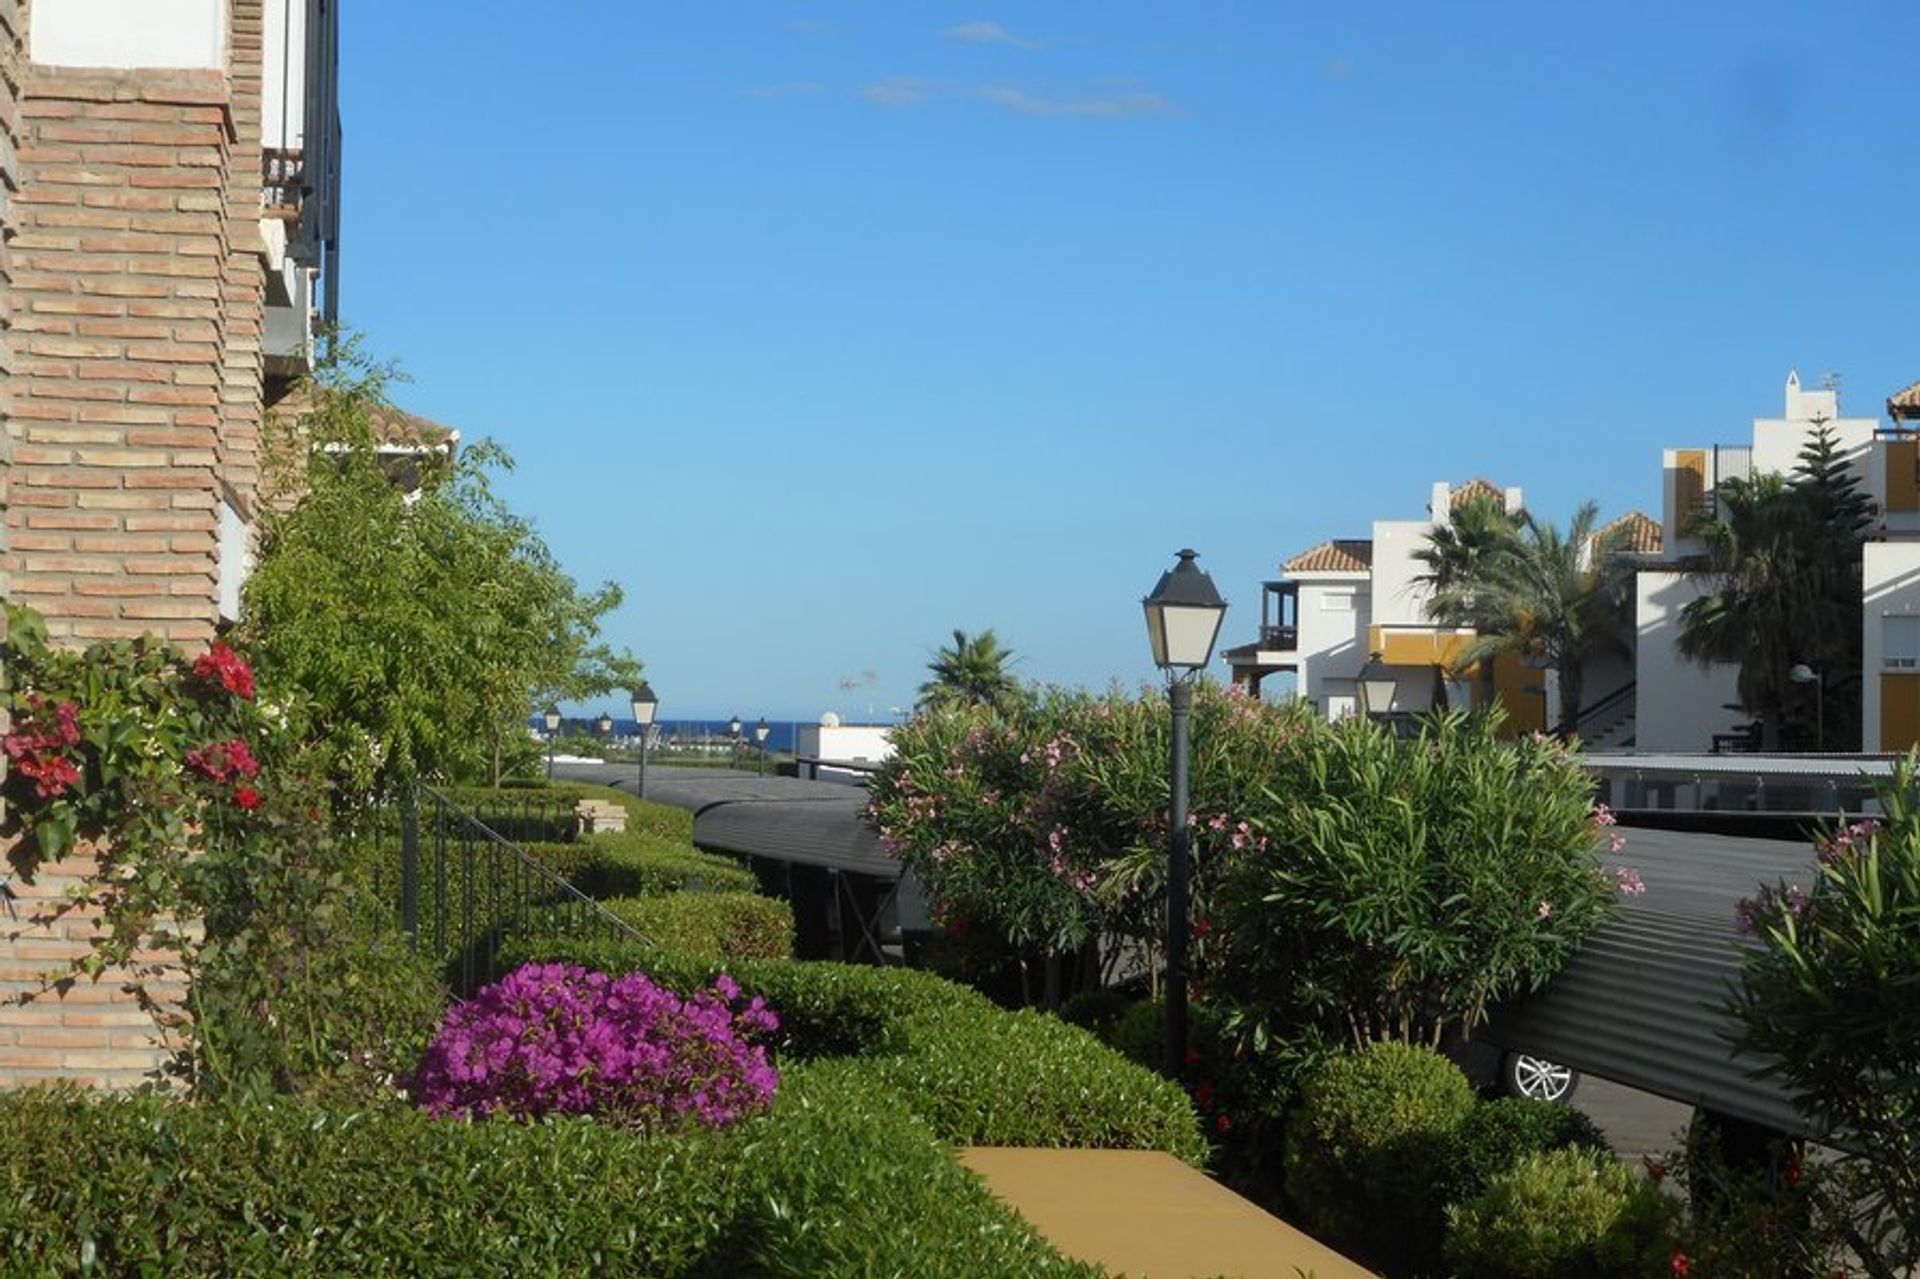 Discover spacious, family-friendly apartments located within walking distance of the beach